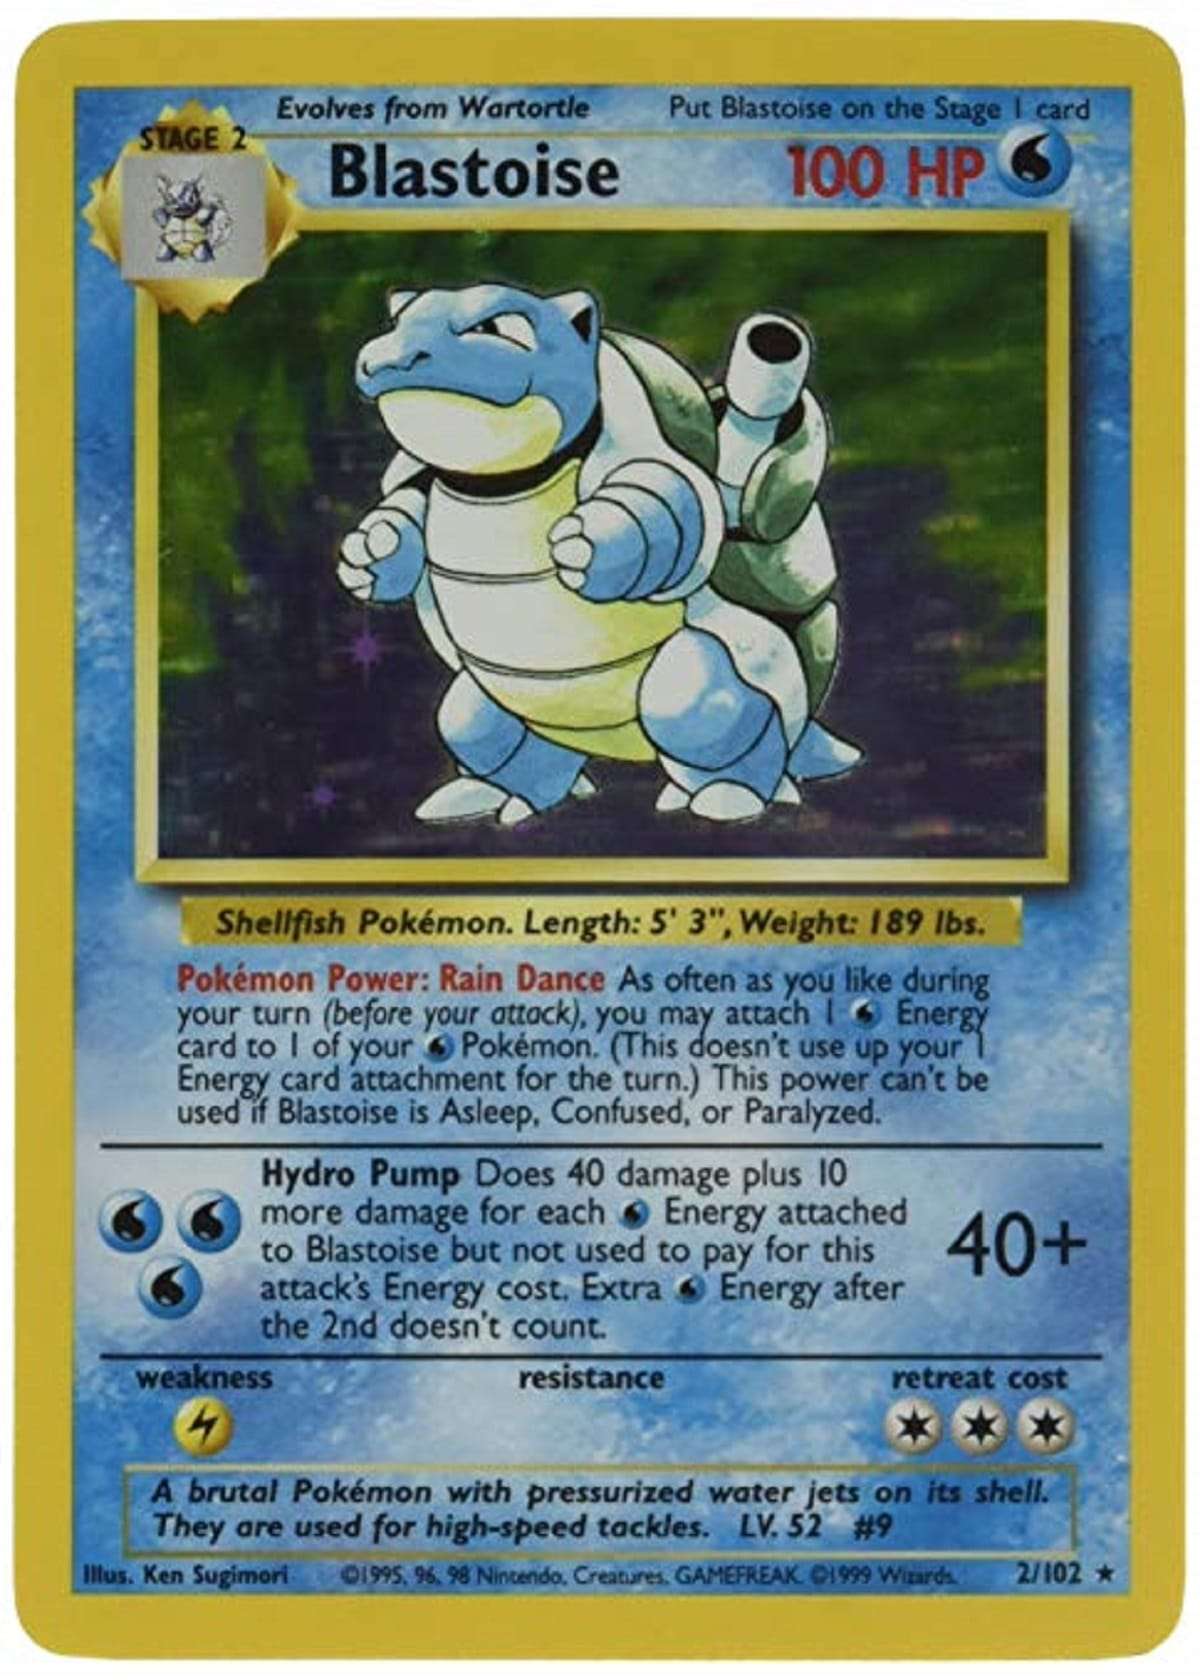 Pokémon cards sells for over $100K at auction